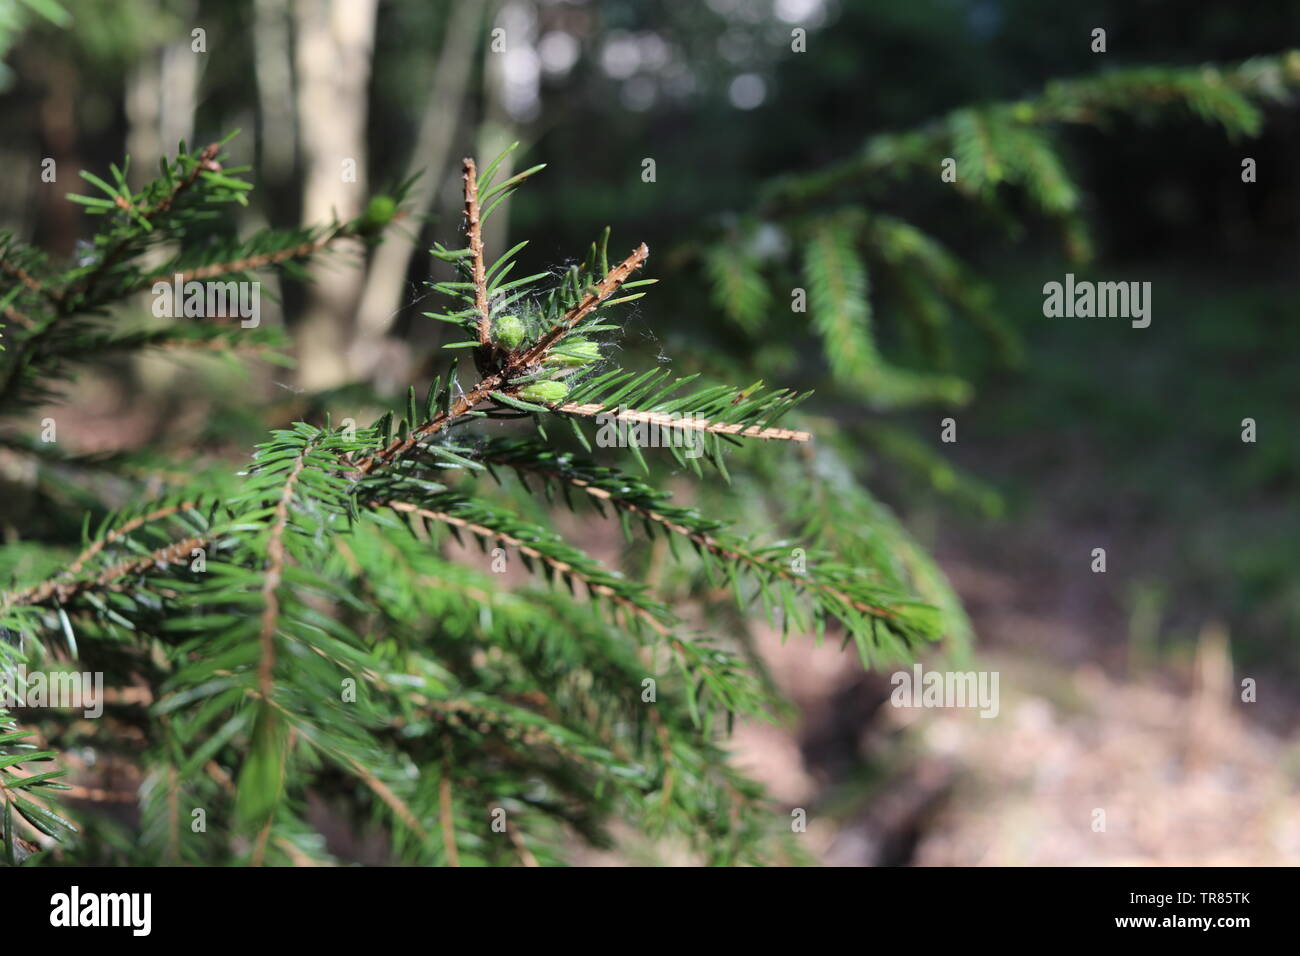 A pine tree branch reaches up towards sunlight. Stock Photo